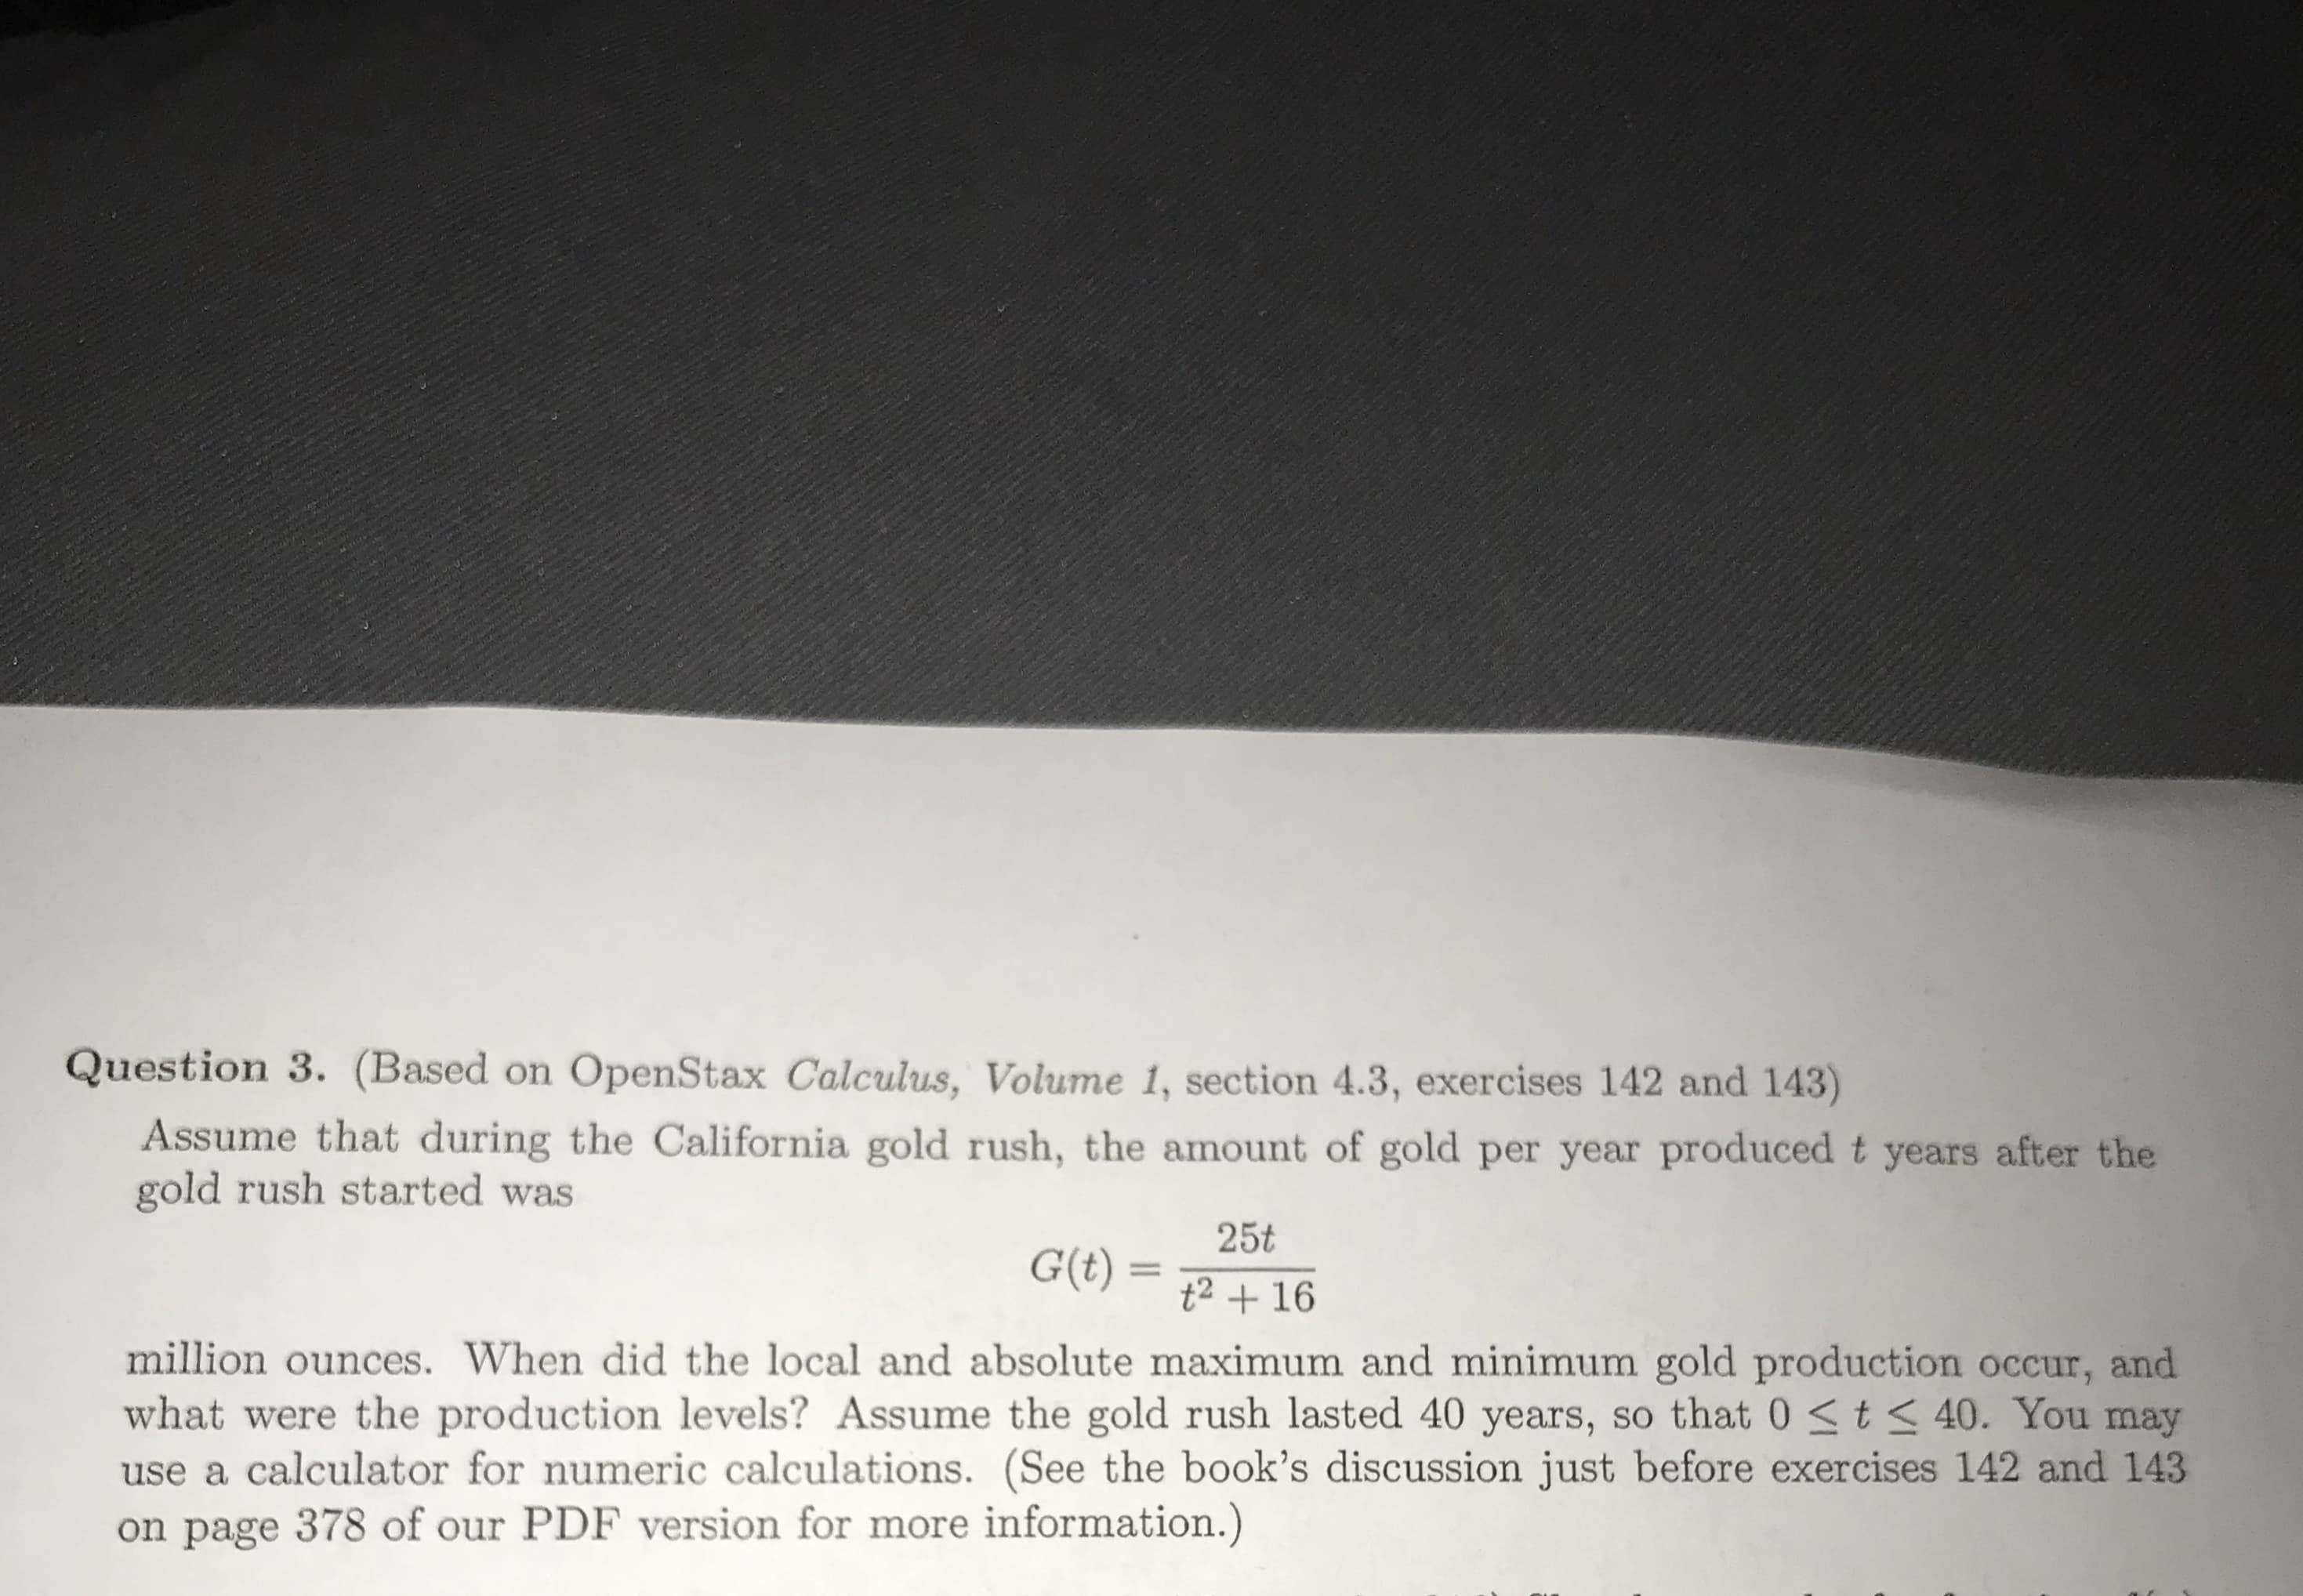 Question 3. (Based on OpenStax Calculus, Volume 1, section 4.3, exercises 142 and 143)
Assume that during the California gold rush, the amount of gold per year produced t years after the
gold rush started was
25t
t2 +16
million ounces. When did the local and absolute maximum and minimum gold production occur, and
what were the production levels? Assume the gold rush lasted 40 years, so that 0 S t3 40. You may
use a calculator for numeric calculations. (See the book's discussion just before exercises 142 and 143
on page 378 of our PDF version for more information.)
